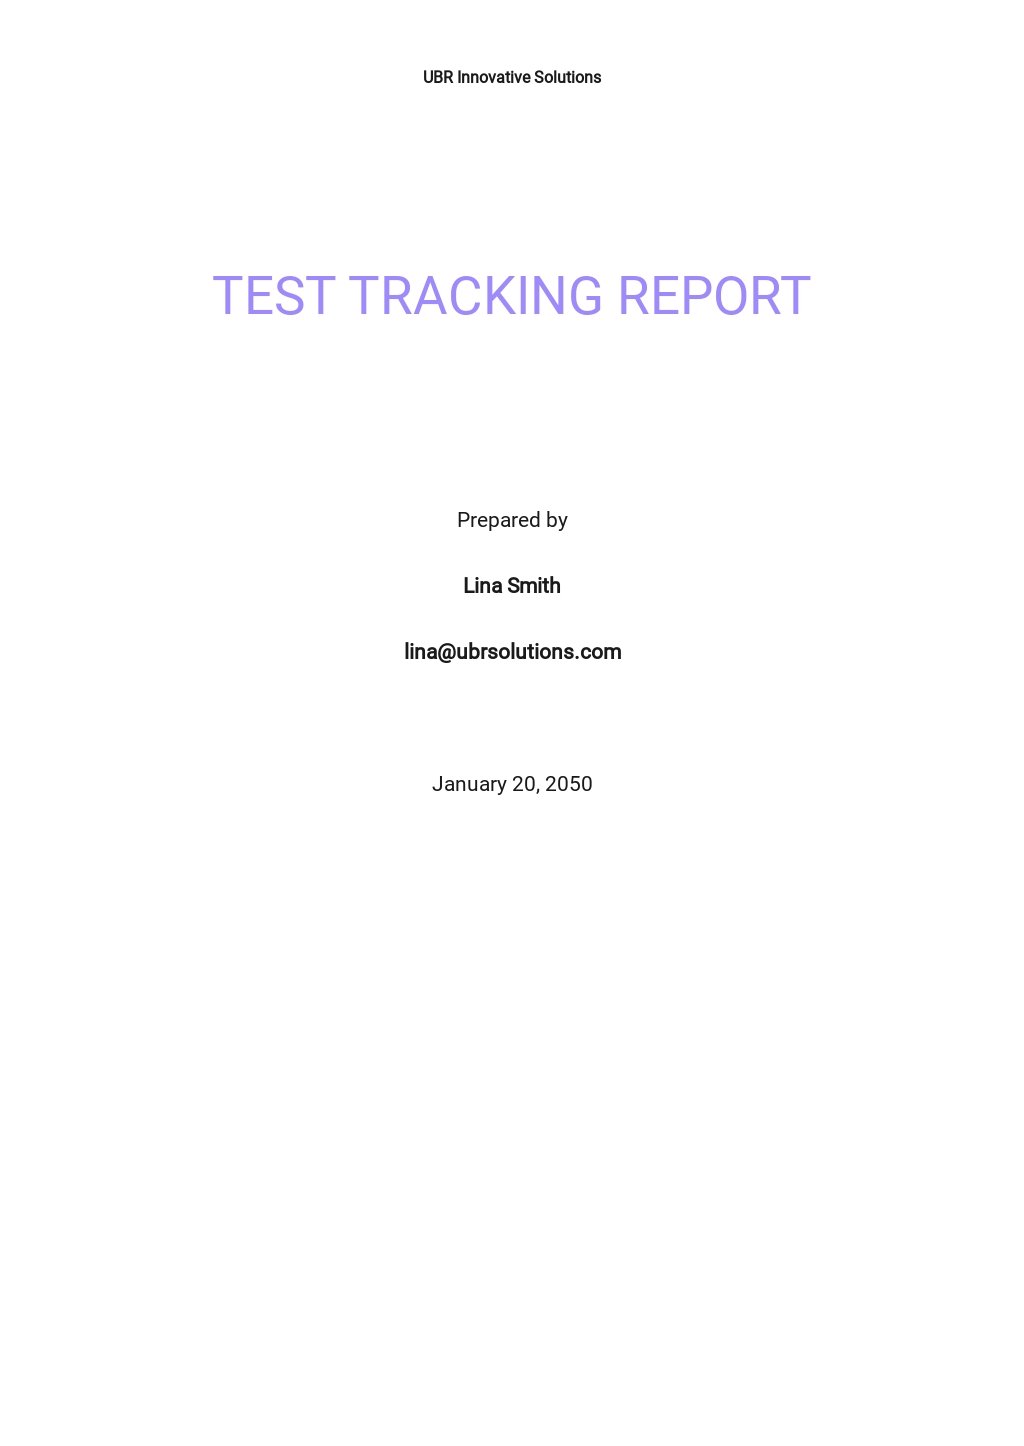 Test Tracking Report Template.jpe